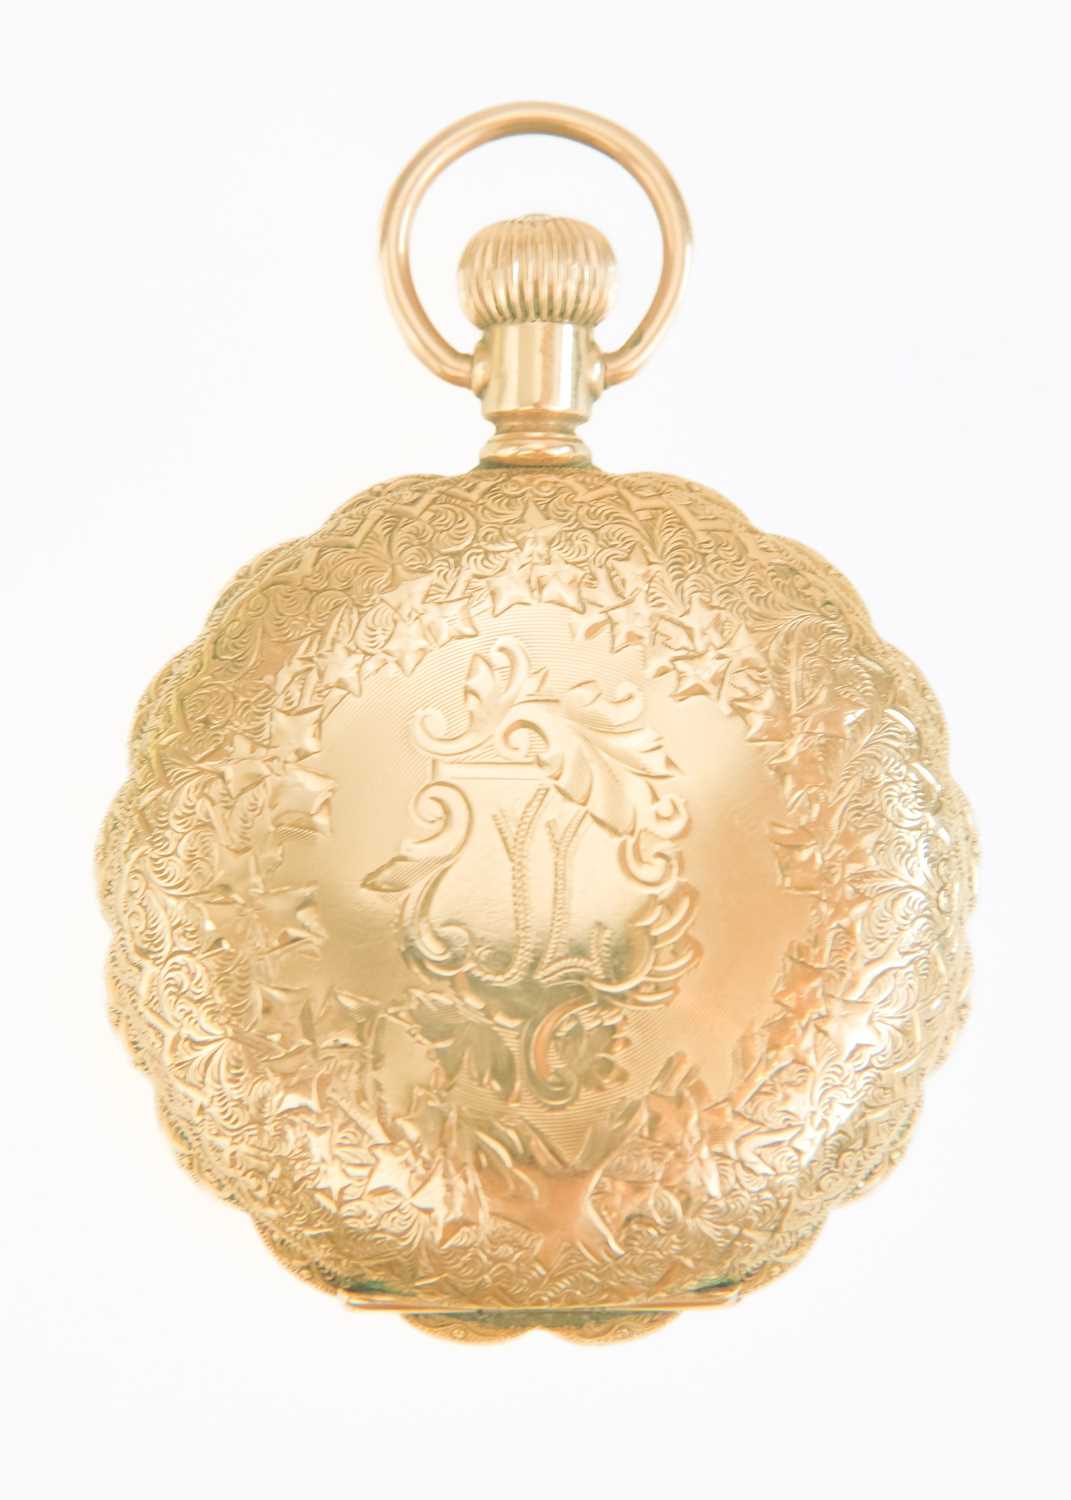 ELGIN - A rose gold plated crown wind full hunter lever pocket watch. - Image 5 of 7